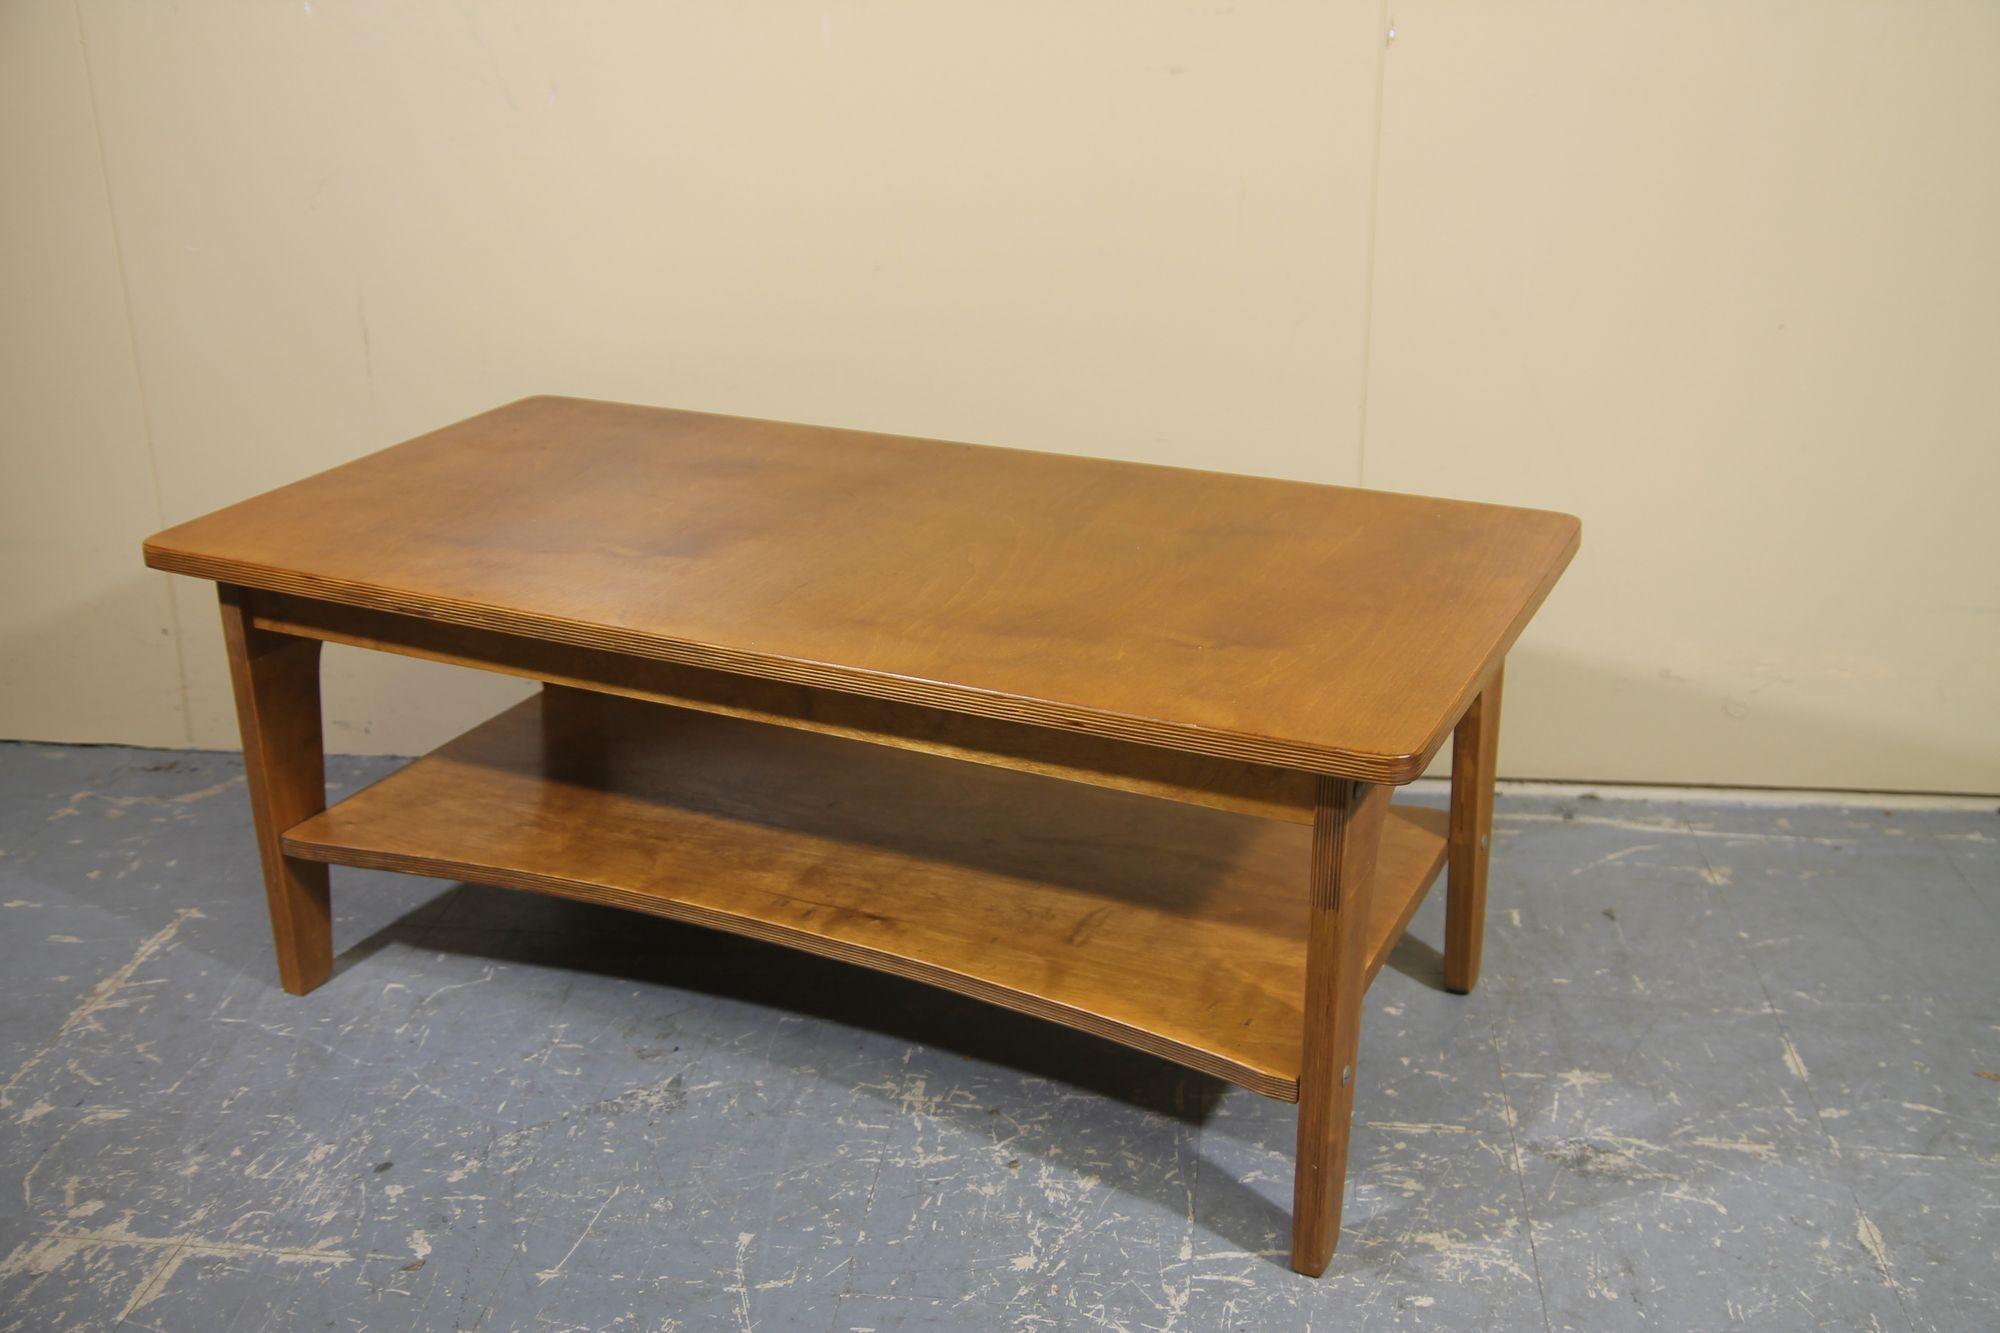 Rare 1960's Plywood Coffee Table In Good Condition For Sale In Asbury Park, NJ